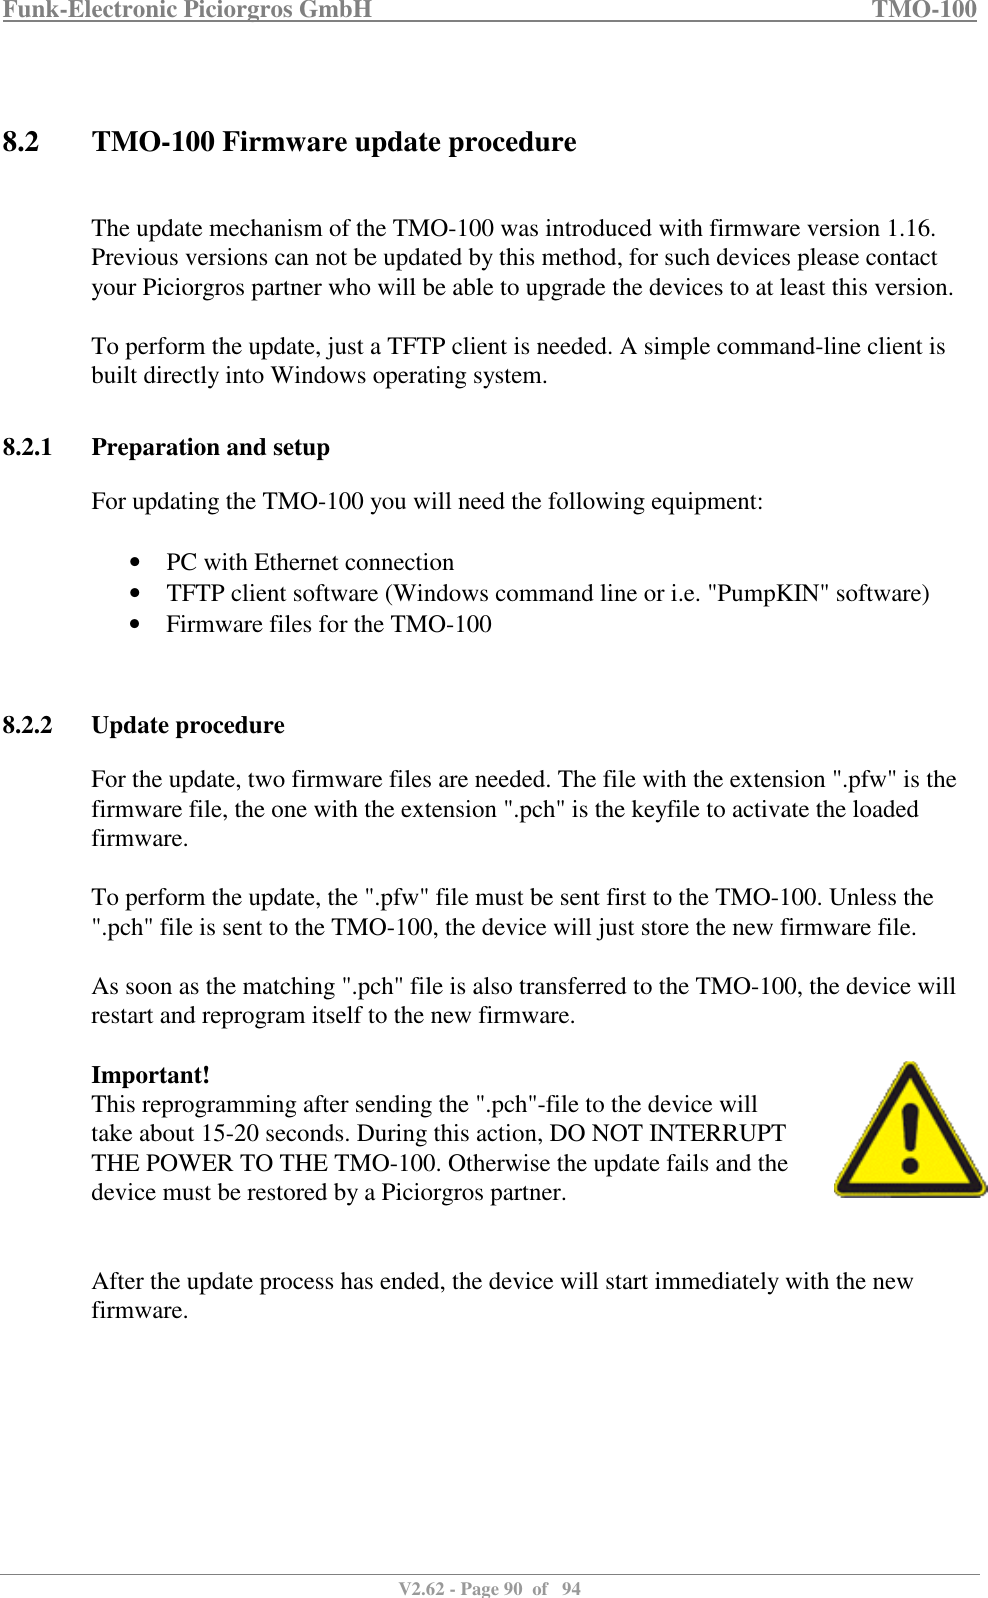 Funk-Electronic Piciorgros GmbH   TMO-100   V2.62 - Page 90  of   94    8.2 TMO-100 Firmware update procedure  The update mechanism of the TMO-100 was introduced with firmware version 1.16. Previous versions can not be updated by this method, for such devices please contact your Piciorgros partner who will be able to upgrade the devices to at least this version.  To perform the update, just a TFTP client is needed. A simple command-line client is built directly into Windows operating system.  8.2.1 Preparation and setup For updating the TMO-100 you will need the following equipment:  • PC with Ethernet connection • TFTP client software (Windows command line or i.e. &quot;PumpKIN&quot; software) • Firmware files for the TMO-100   8.2.2 Update procedure For the update, two firmware files are needed. The file with the extension &quot;.pfw&quot; is the firmware file, the one with the extension &quot;.pch&quot; is the keyfile to activate the loaded firmware.  To perform the update, the &quot;.pfw&quot; file must be sent first to the TMO-100. Unless the &quot;.pch&quot; file is sent to the TMO-100, the device will just store the new firmware file.  As soon as the matching &quot;.pch&quot; file is also transferred to the TMO-100, the device will restart and reprogram itself to the new firmware.   Important! This reprogramming after sending the &quot;.pch&quot;-file to the device will take about 15-20 seconds. During this action, DO NOT INTERRUPT THE POWER TO THE TMO-100. Otherwise the update fails and the device must be restored by a Piciorgros partner.   After the update process has ended, the device will start immediately with the new firmware.   